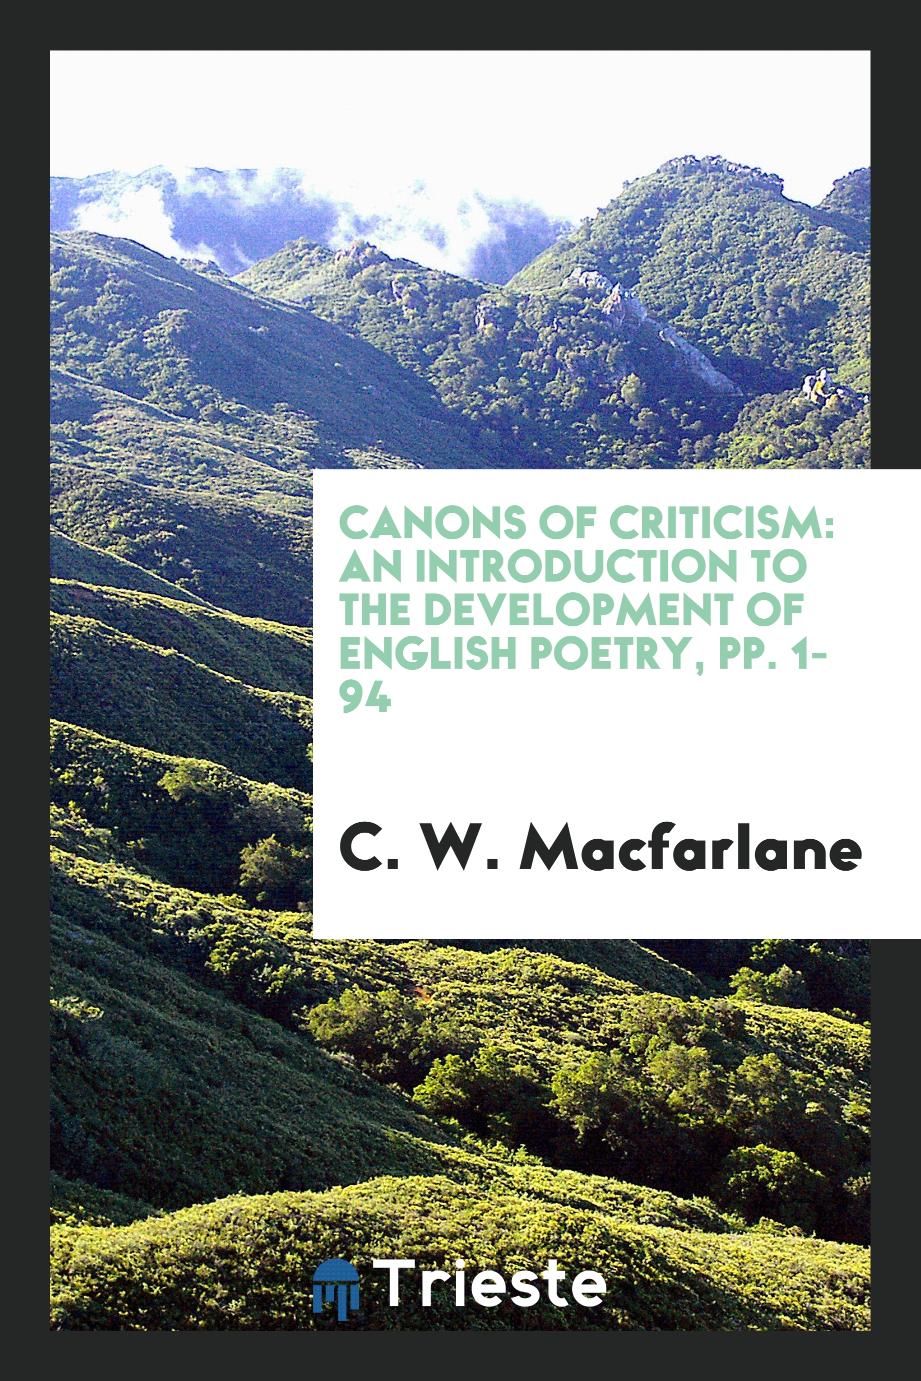 Canons of Criticism: An Introduction to the Development of English Poetry, pp. 1-94